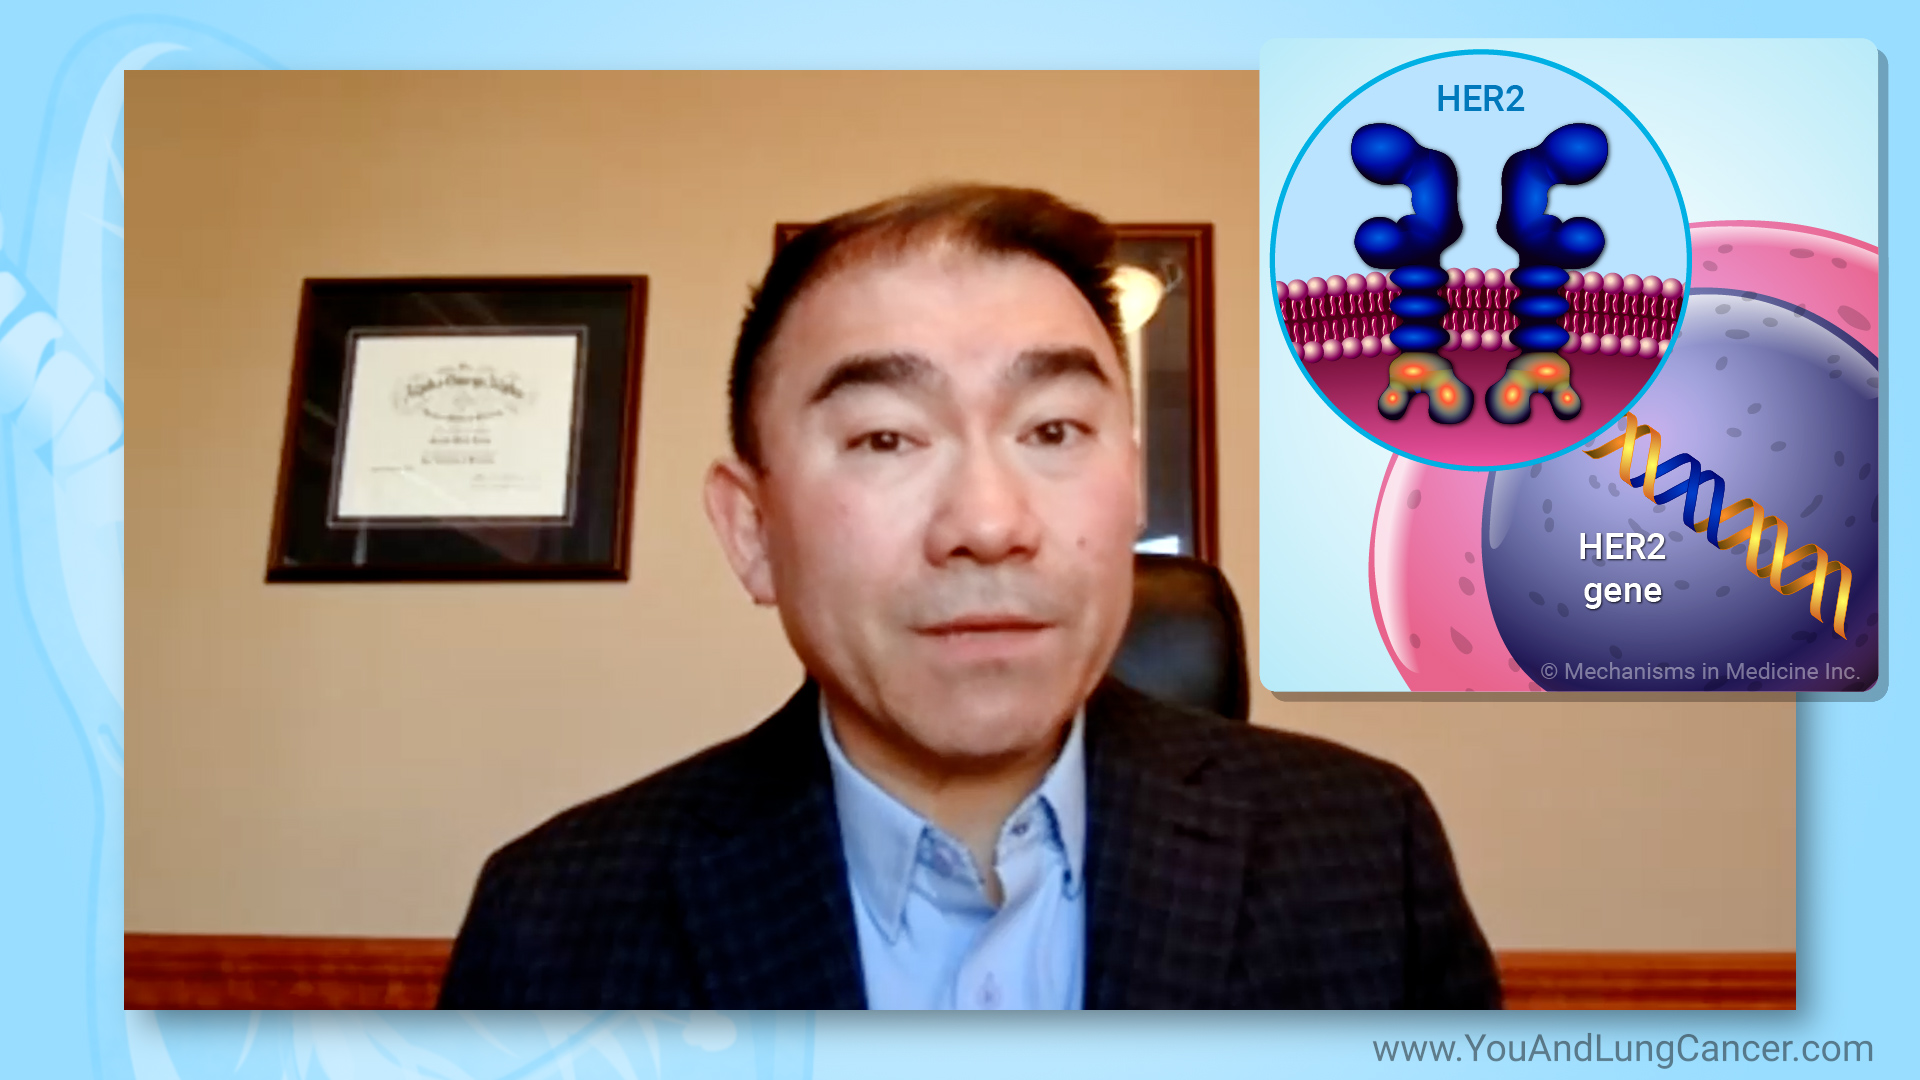 What is a HER2 mutation in lung cancer?